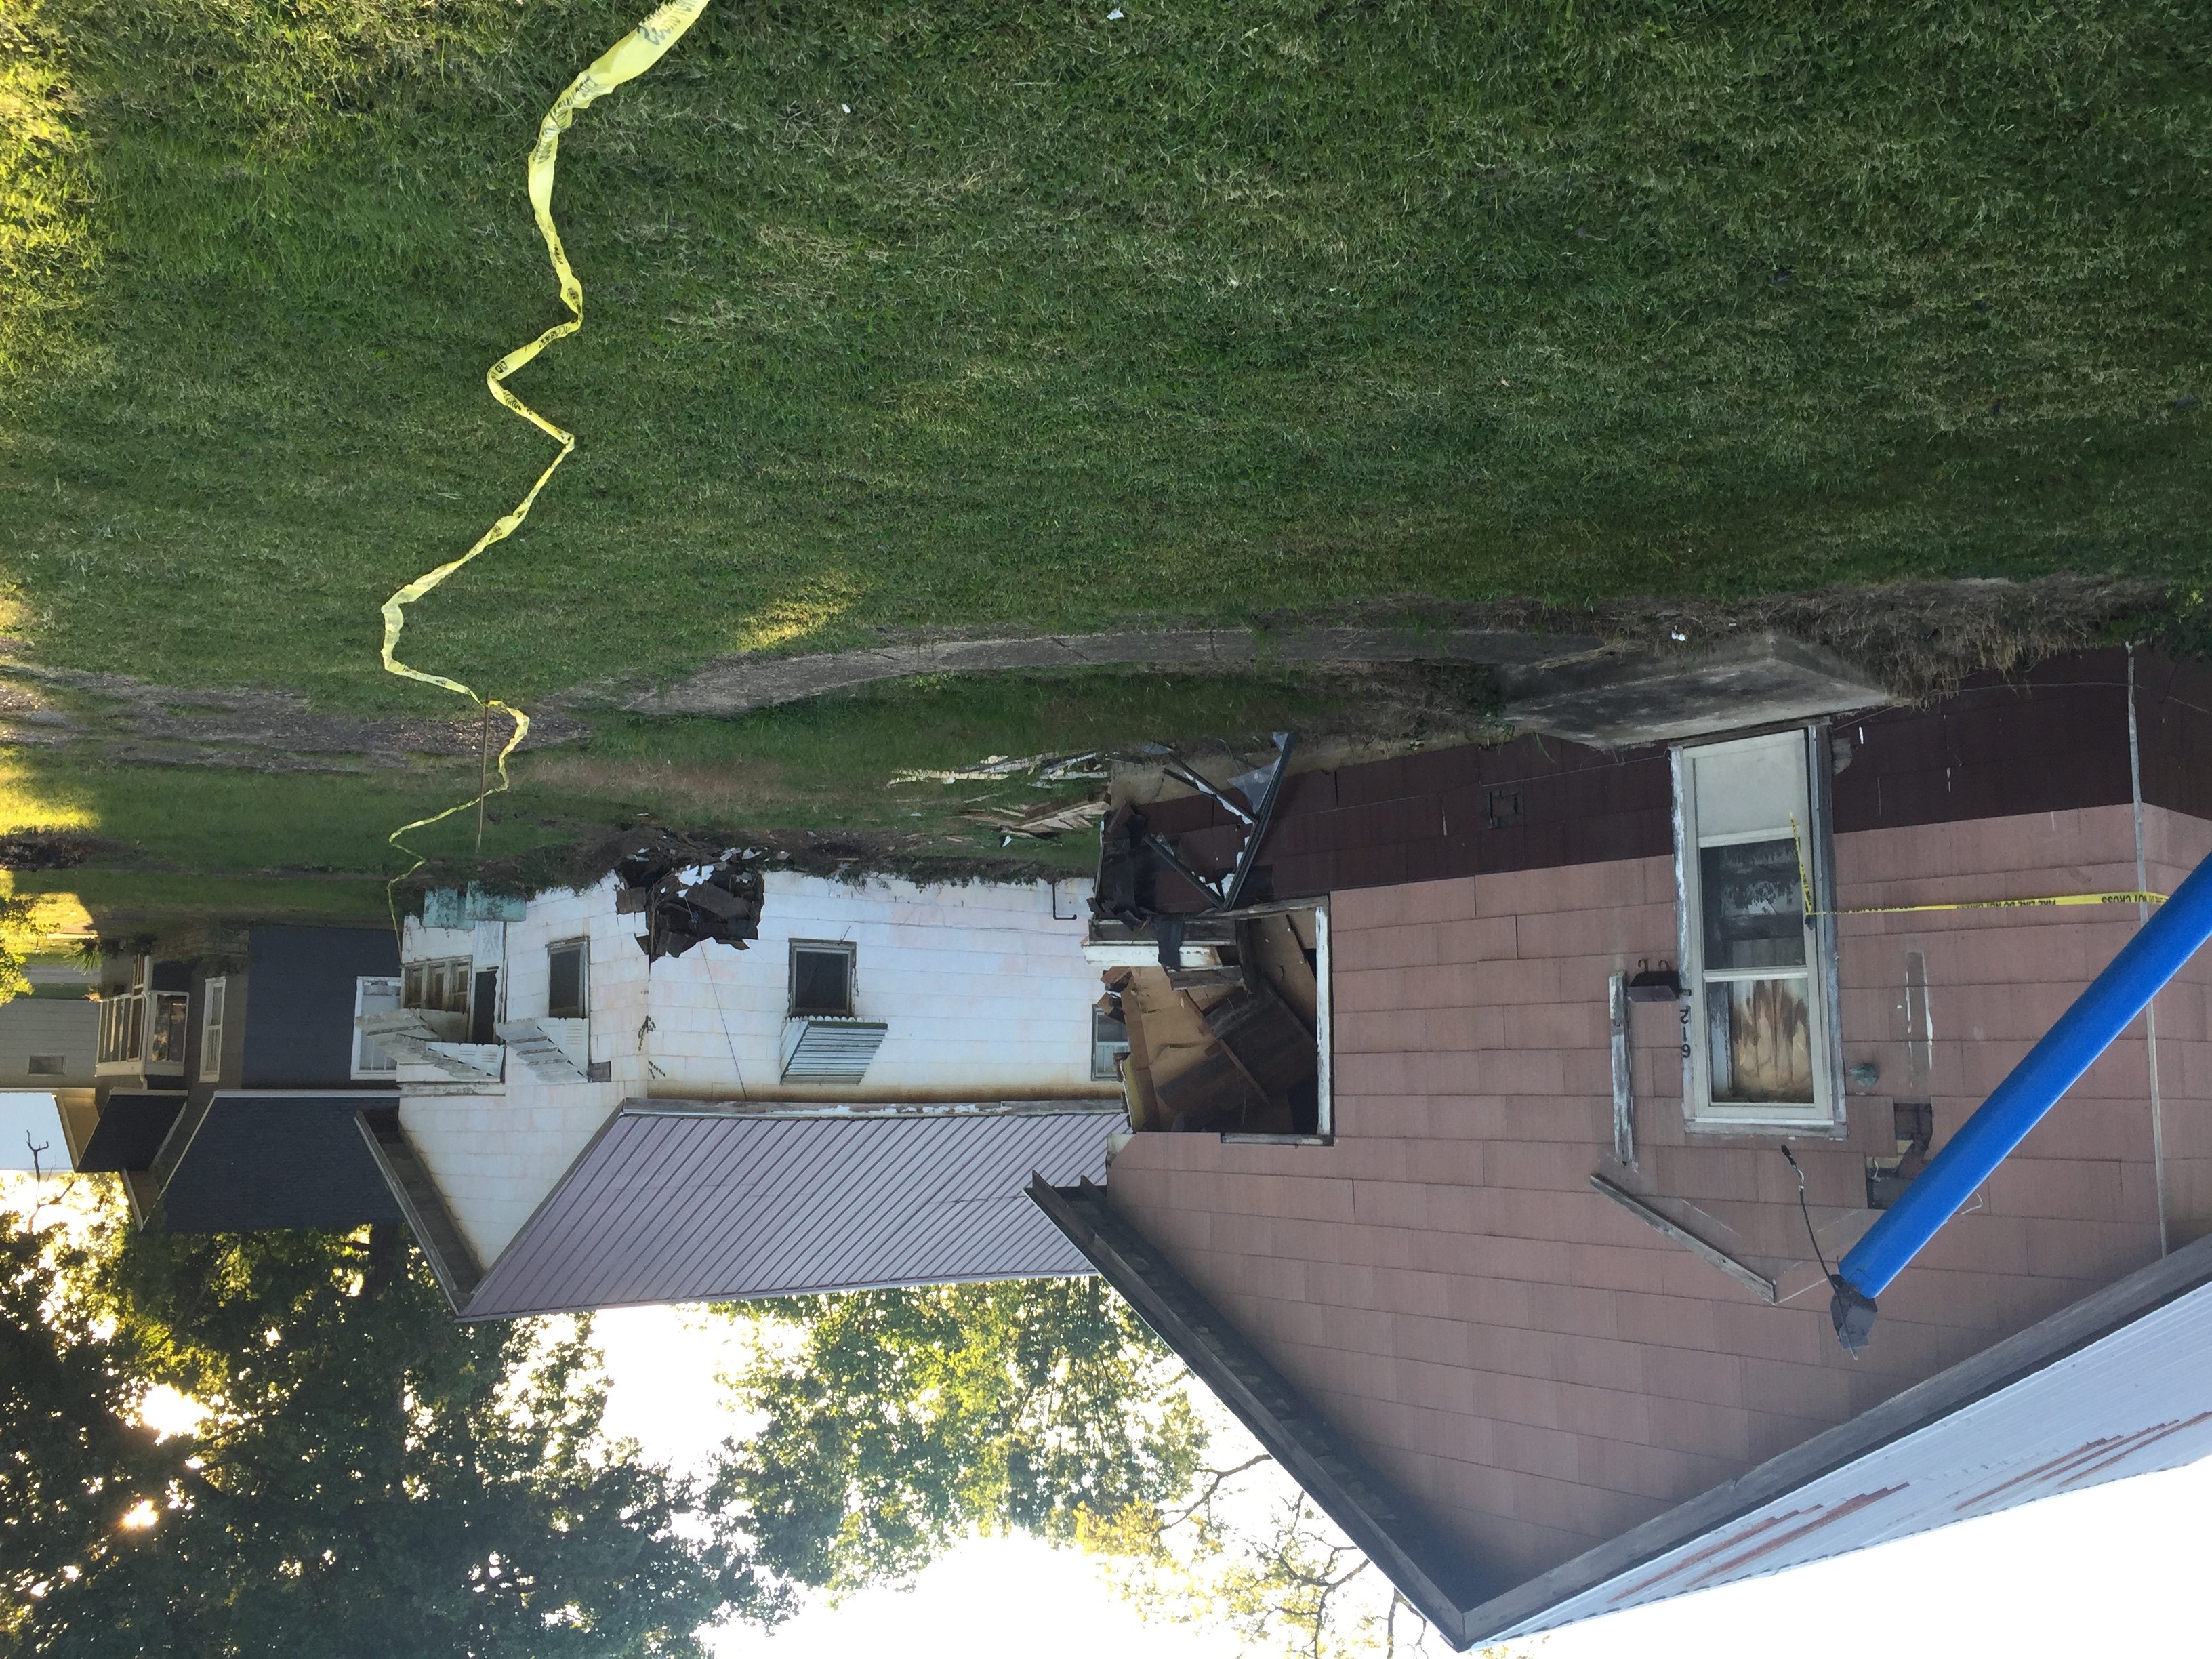 No Injuries after Vehicle Hits Houses